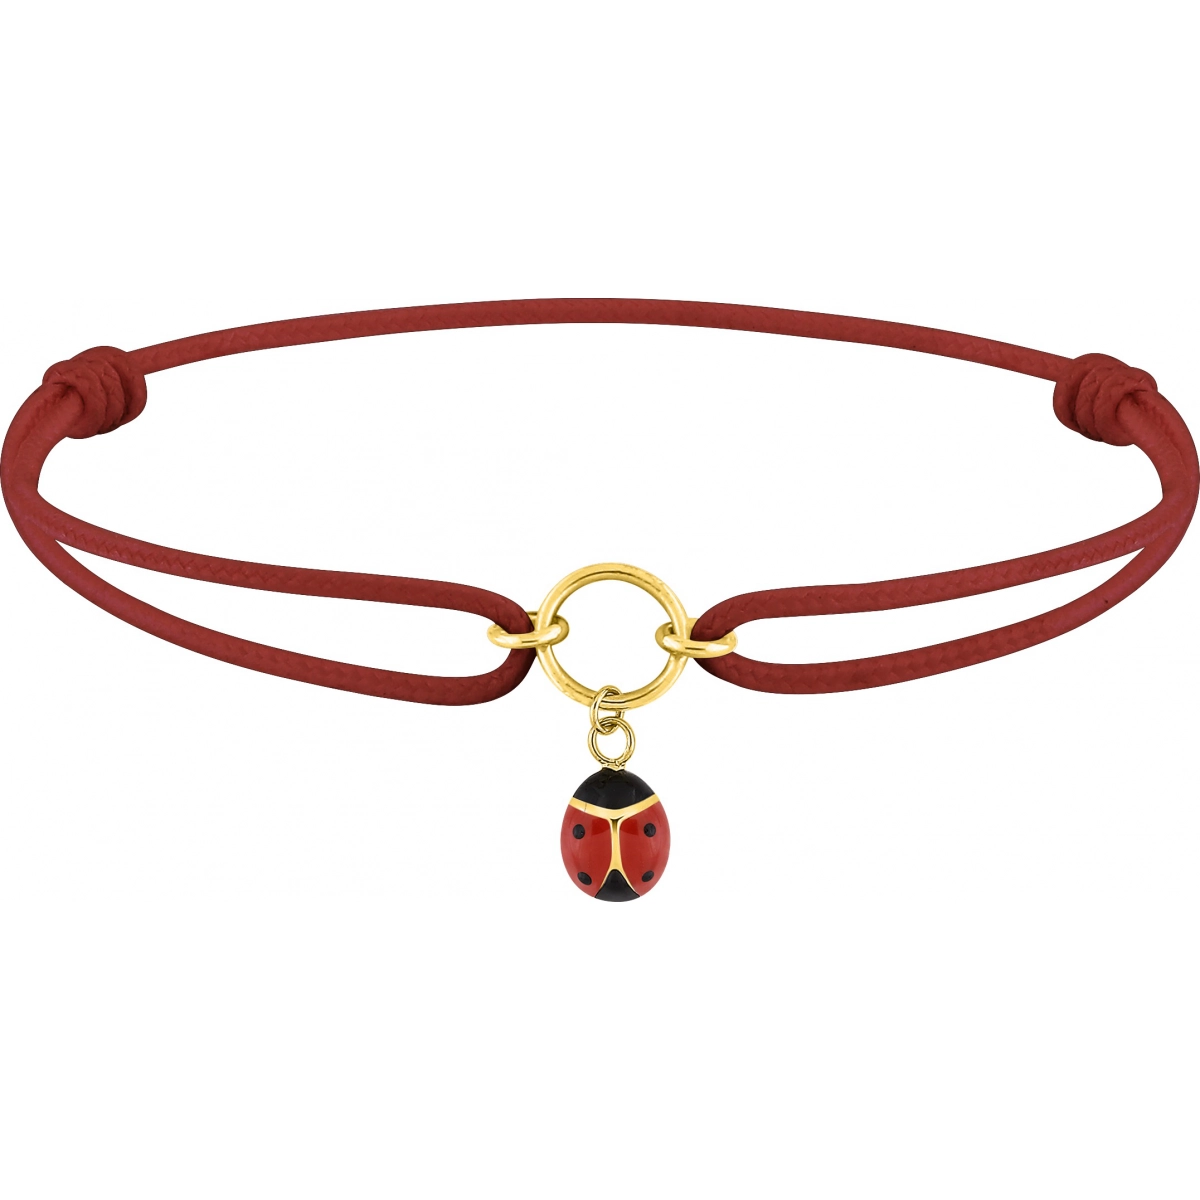 Bracelet w. cord and lacquer 9K YG Lua Blanca  510590.89 